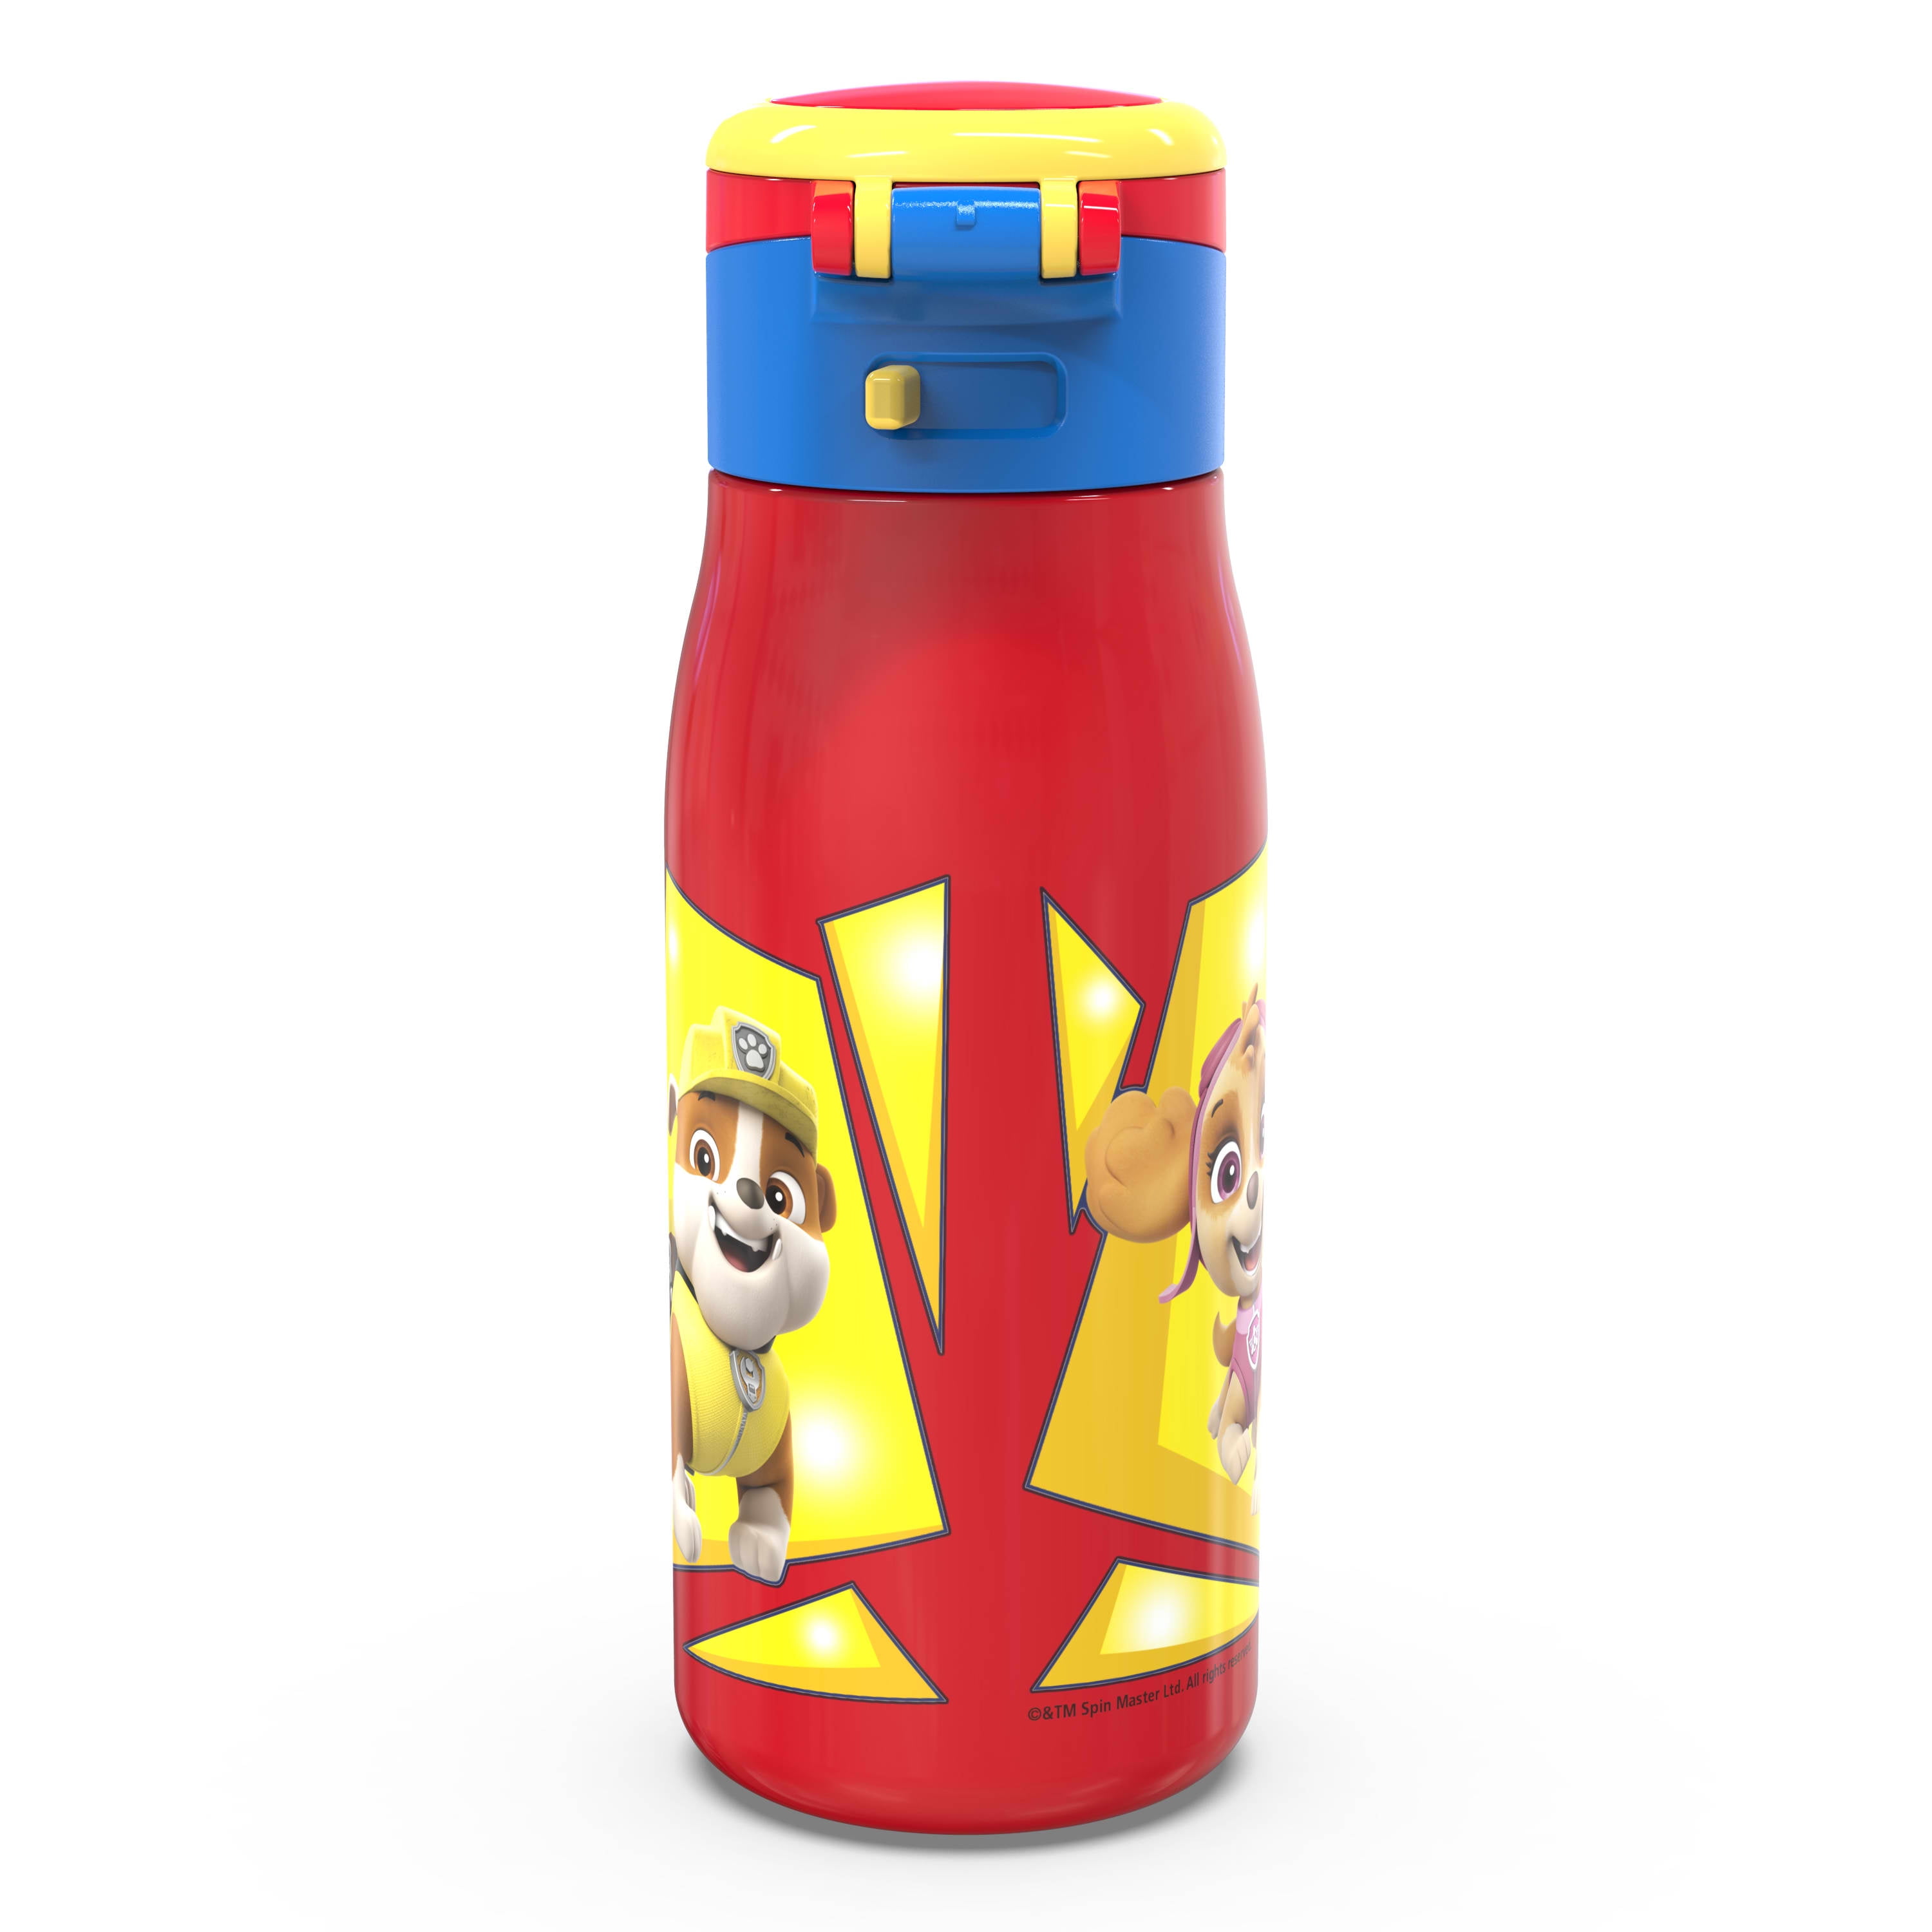 Paw Patrol 16.9 oz Limited Edition Aluminum Water Bottles